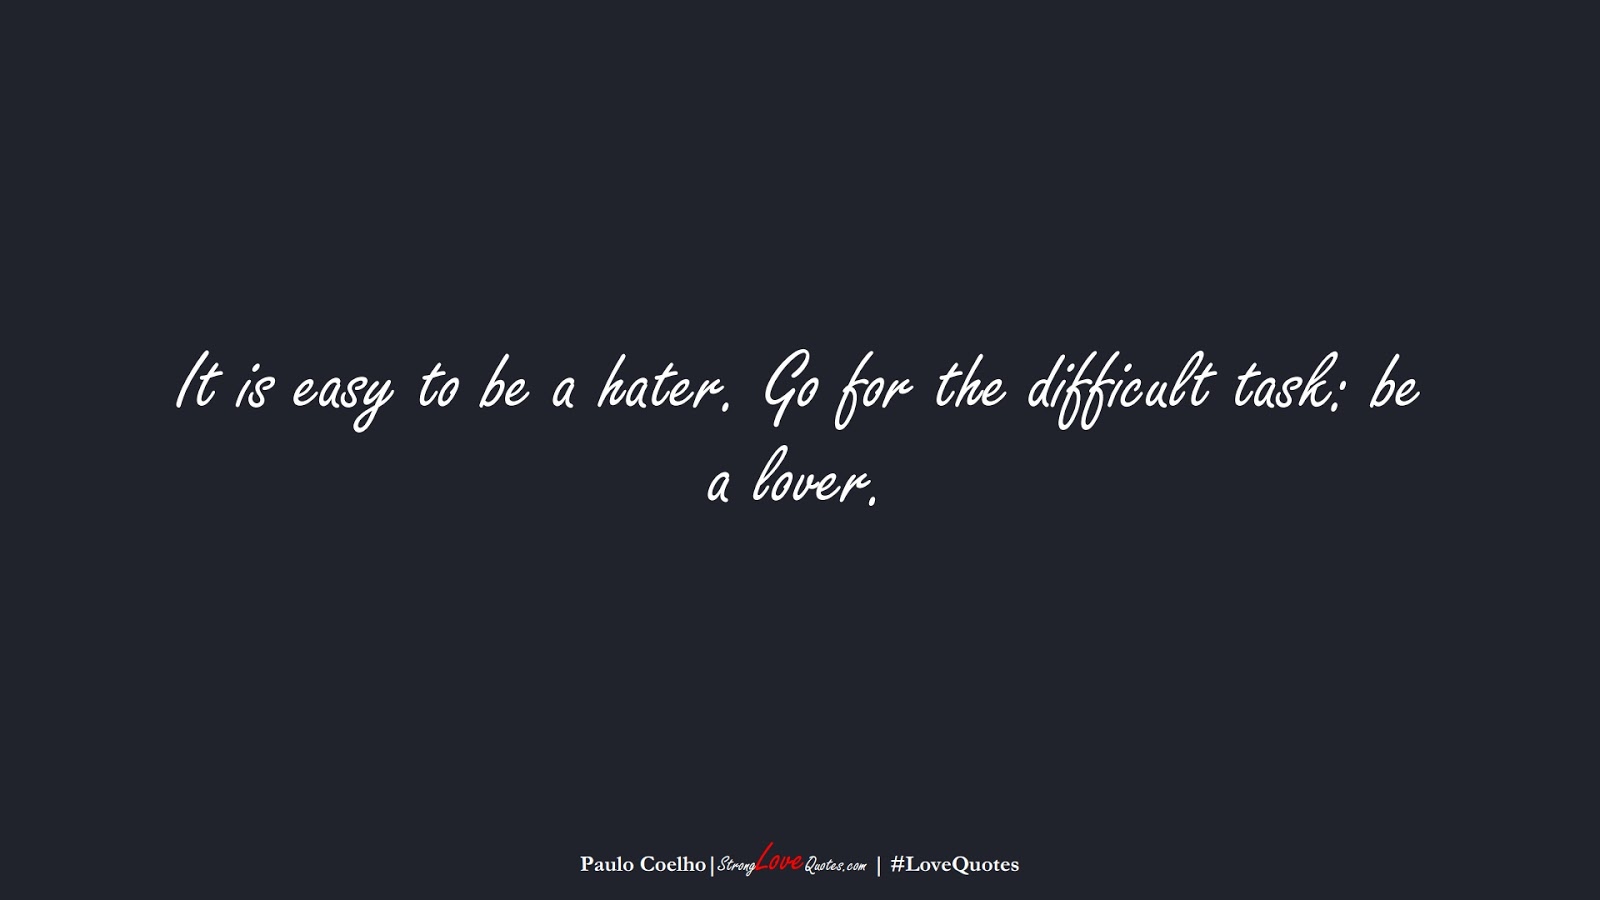 It is easy to be a hater. Go for the difficult task: be a lover. (Paulo Coelho);  #LoveQuotes